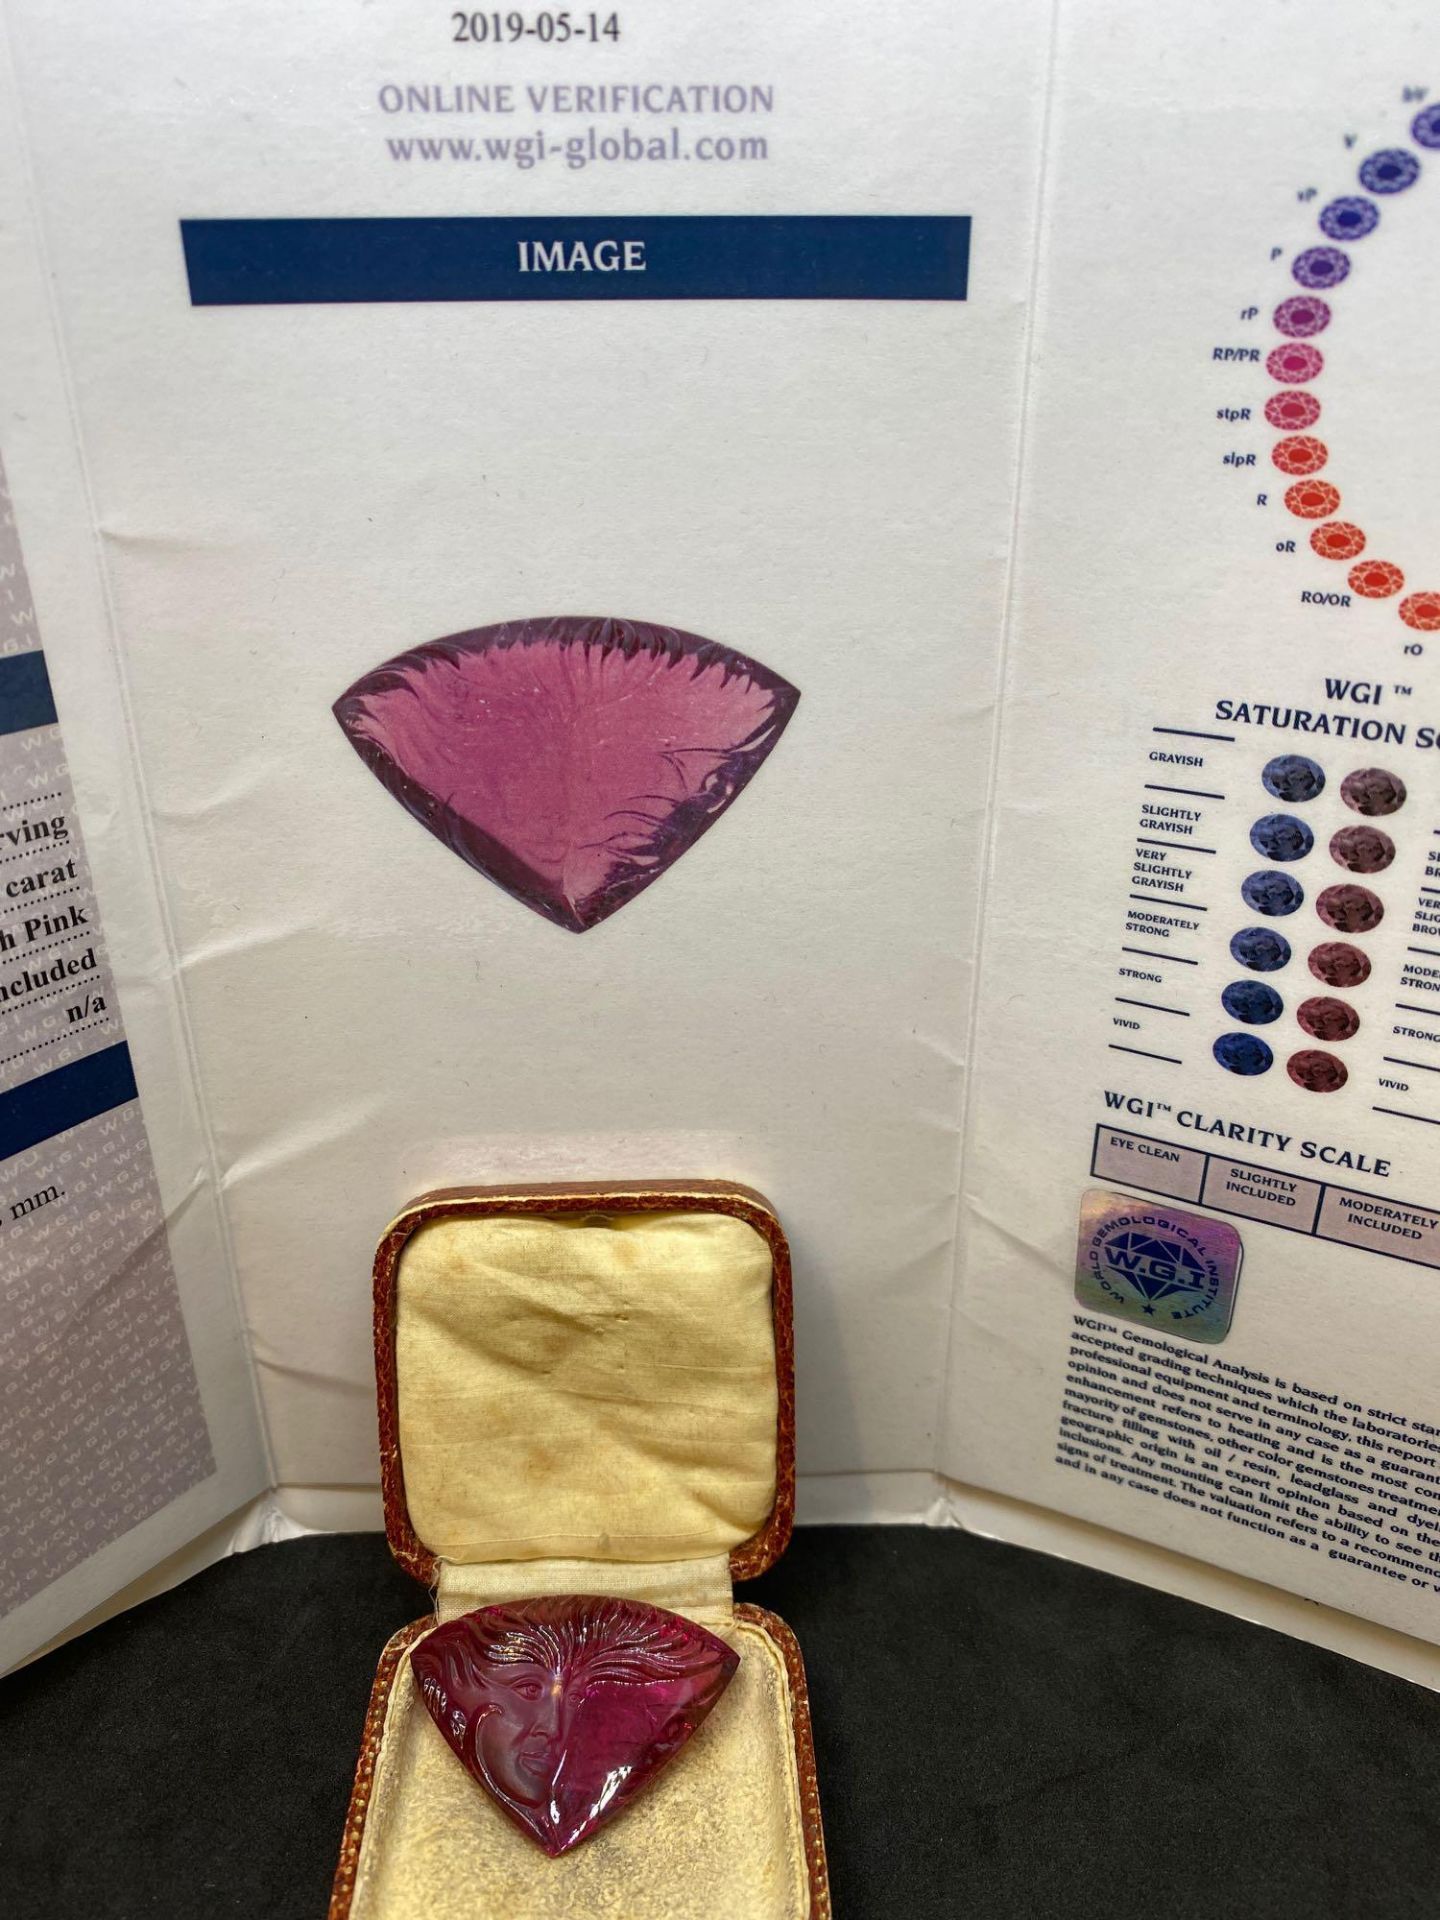 WOW AMAZING 103.22ct Natural Pink Tourmaline with WGI CERTIFICATE - Image 6 of 8